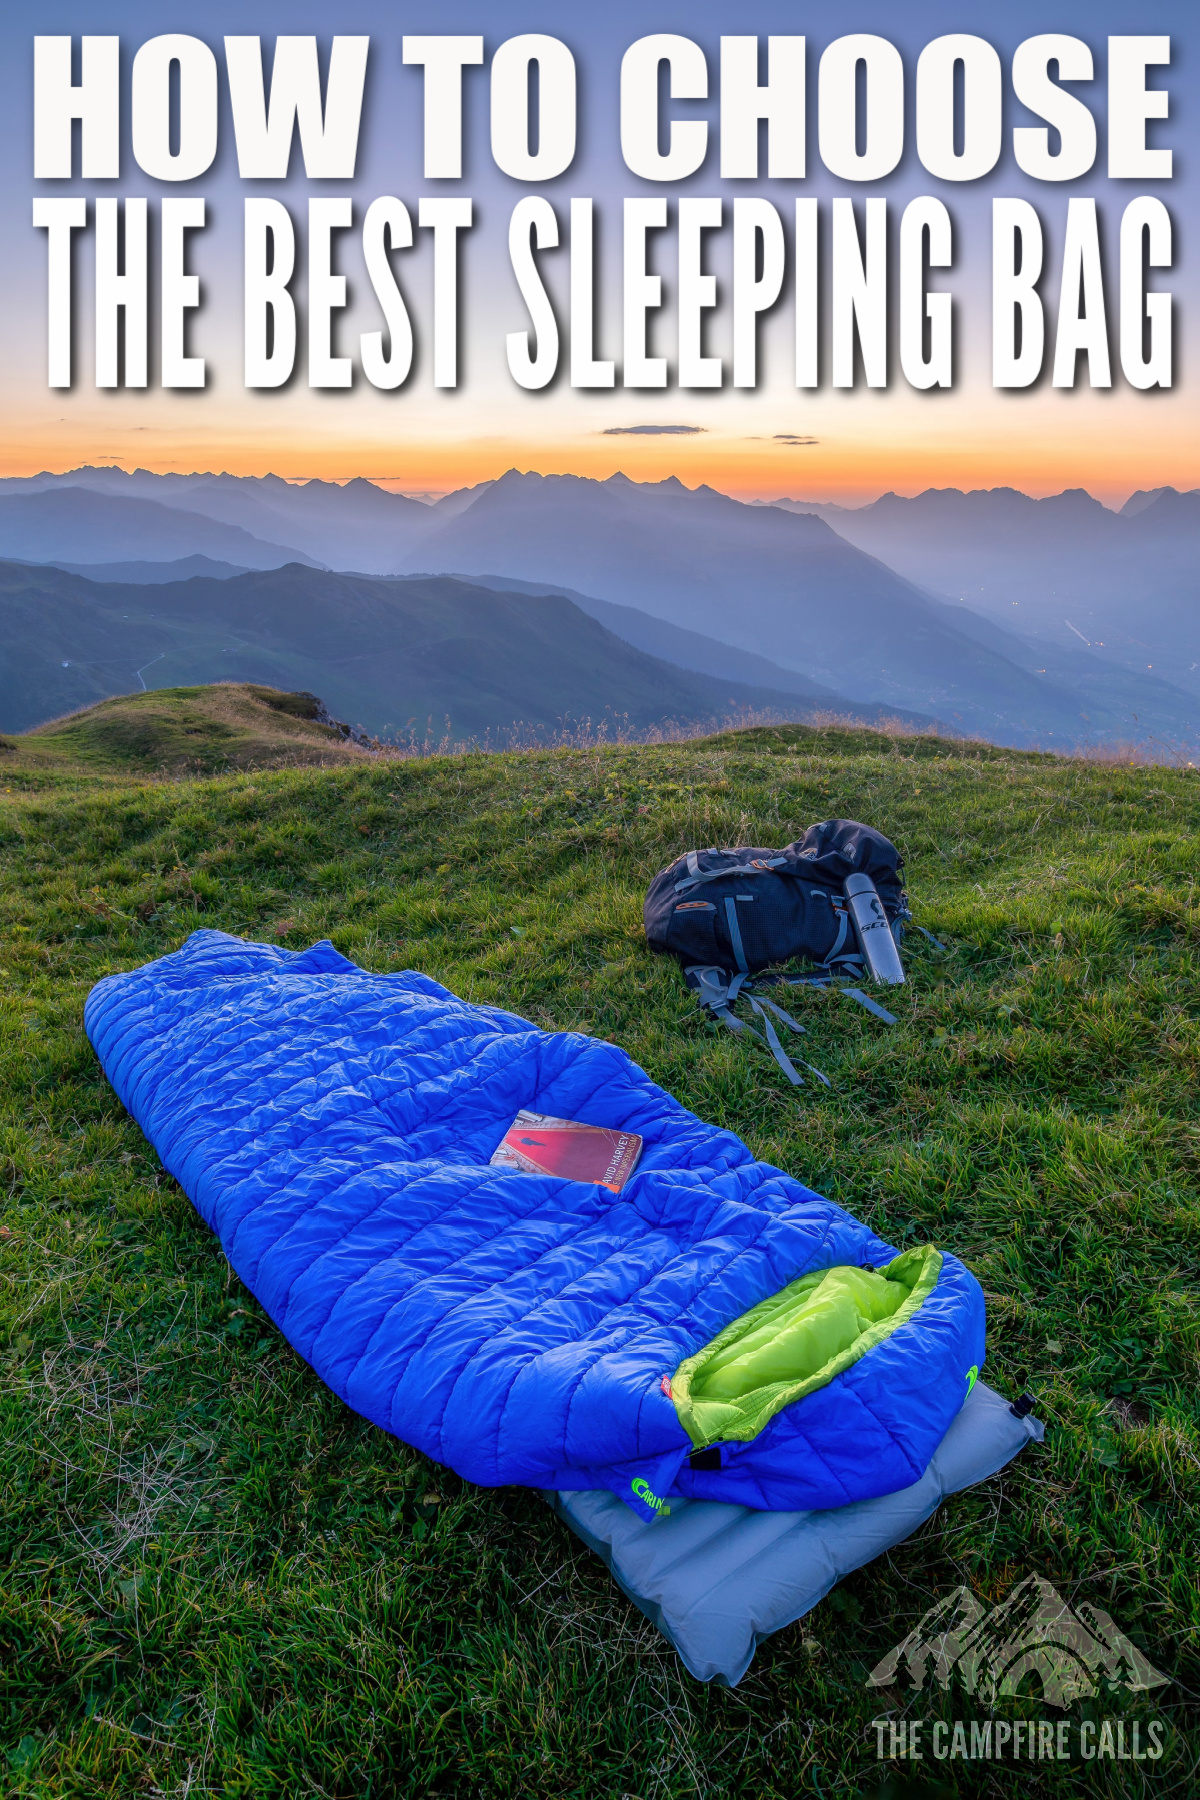 Choosing a sleeping bag can seem daunting, but it doesn't have to be. We share how to choose the best sleeping bag for your next camping trip.